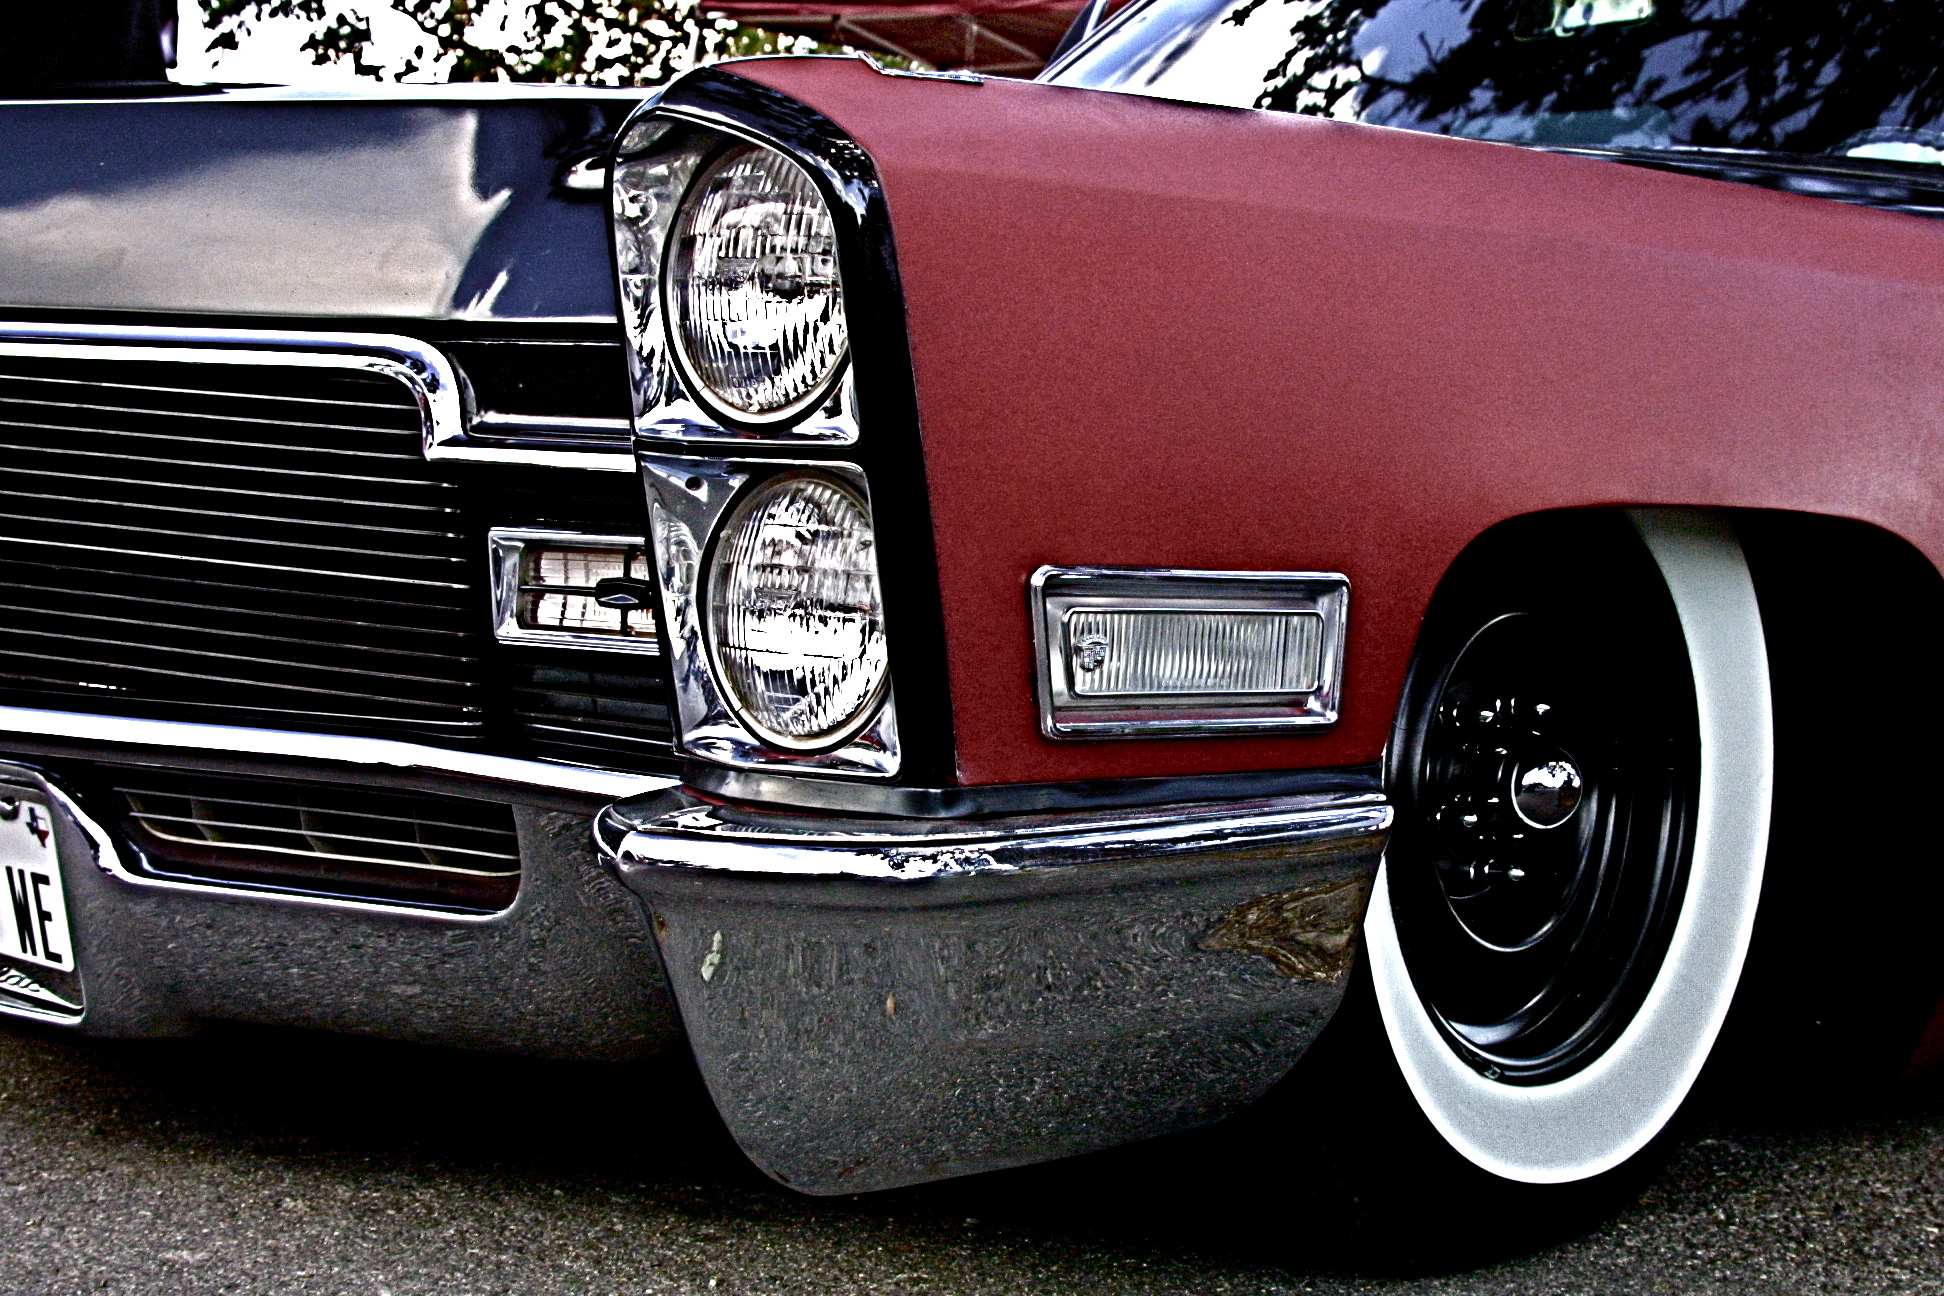 1968 cadillac lowrider classic wheel wallpapers hd desktop and mobile backgrounds 1968 cadillac lowrider classic